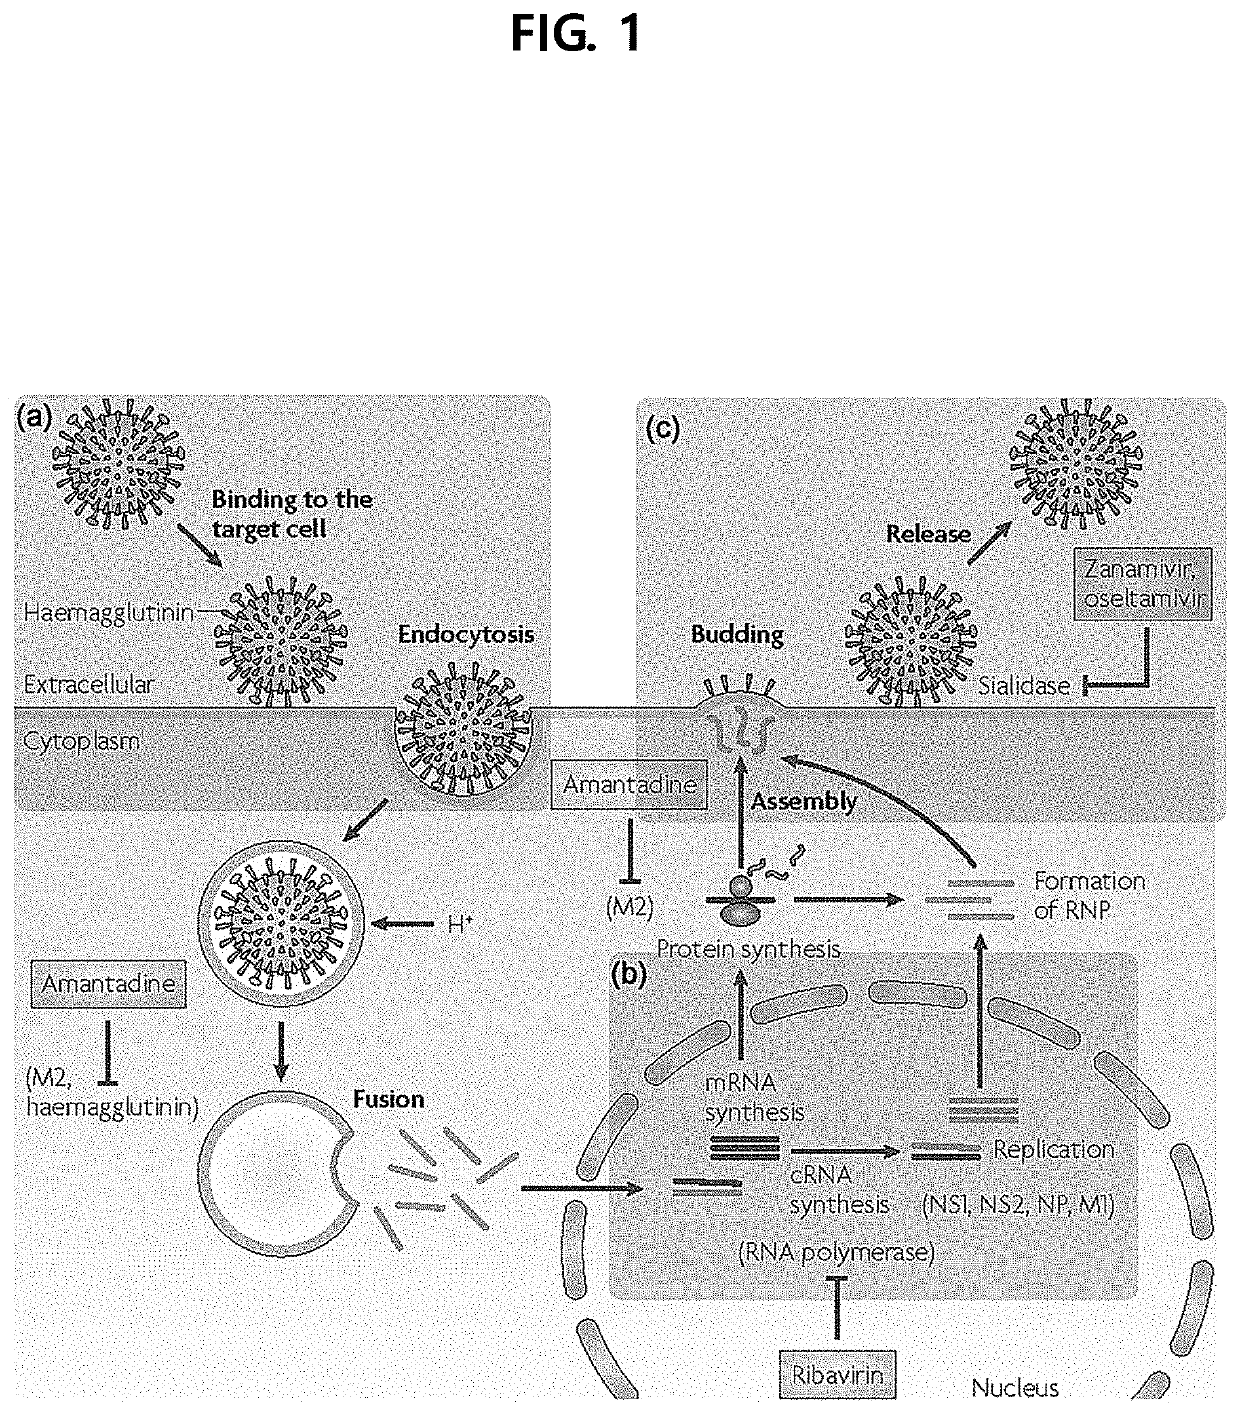 Composition for preventing or inhibiting influenza virus infection, containing ginseng berry polysaccharides